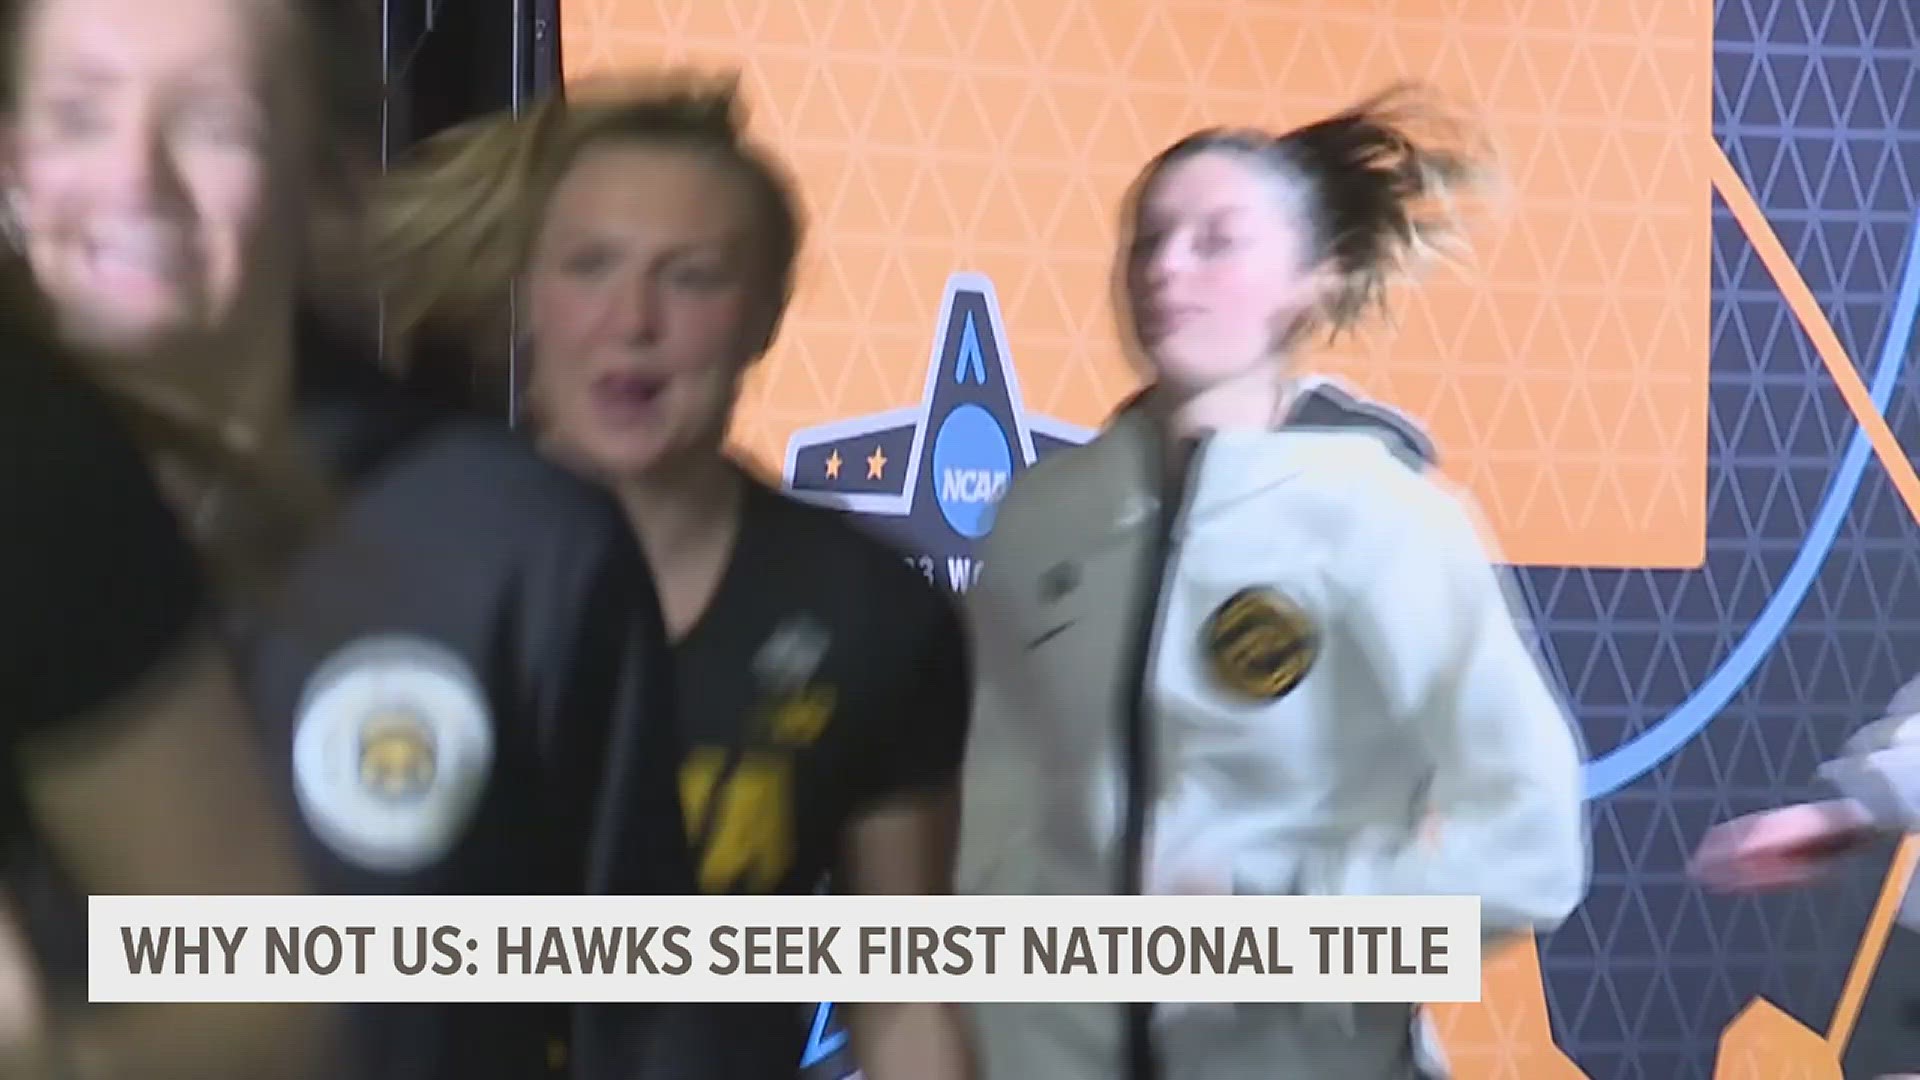 After upsetting the #1 seed South Carolina, Caitlin Clark and the Iowa Hawkeyes are just 40 minutes away from their first championship.